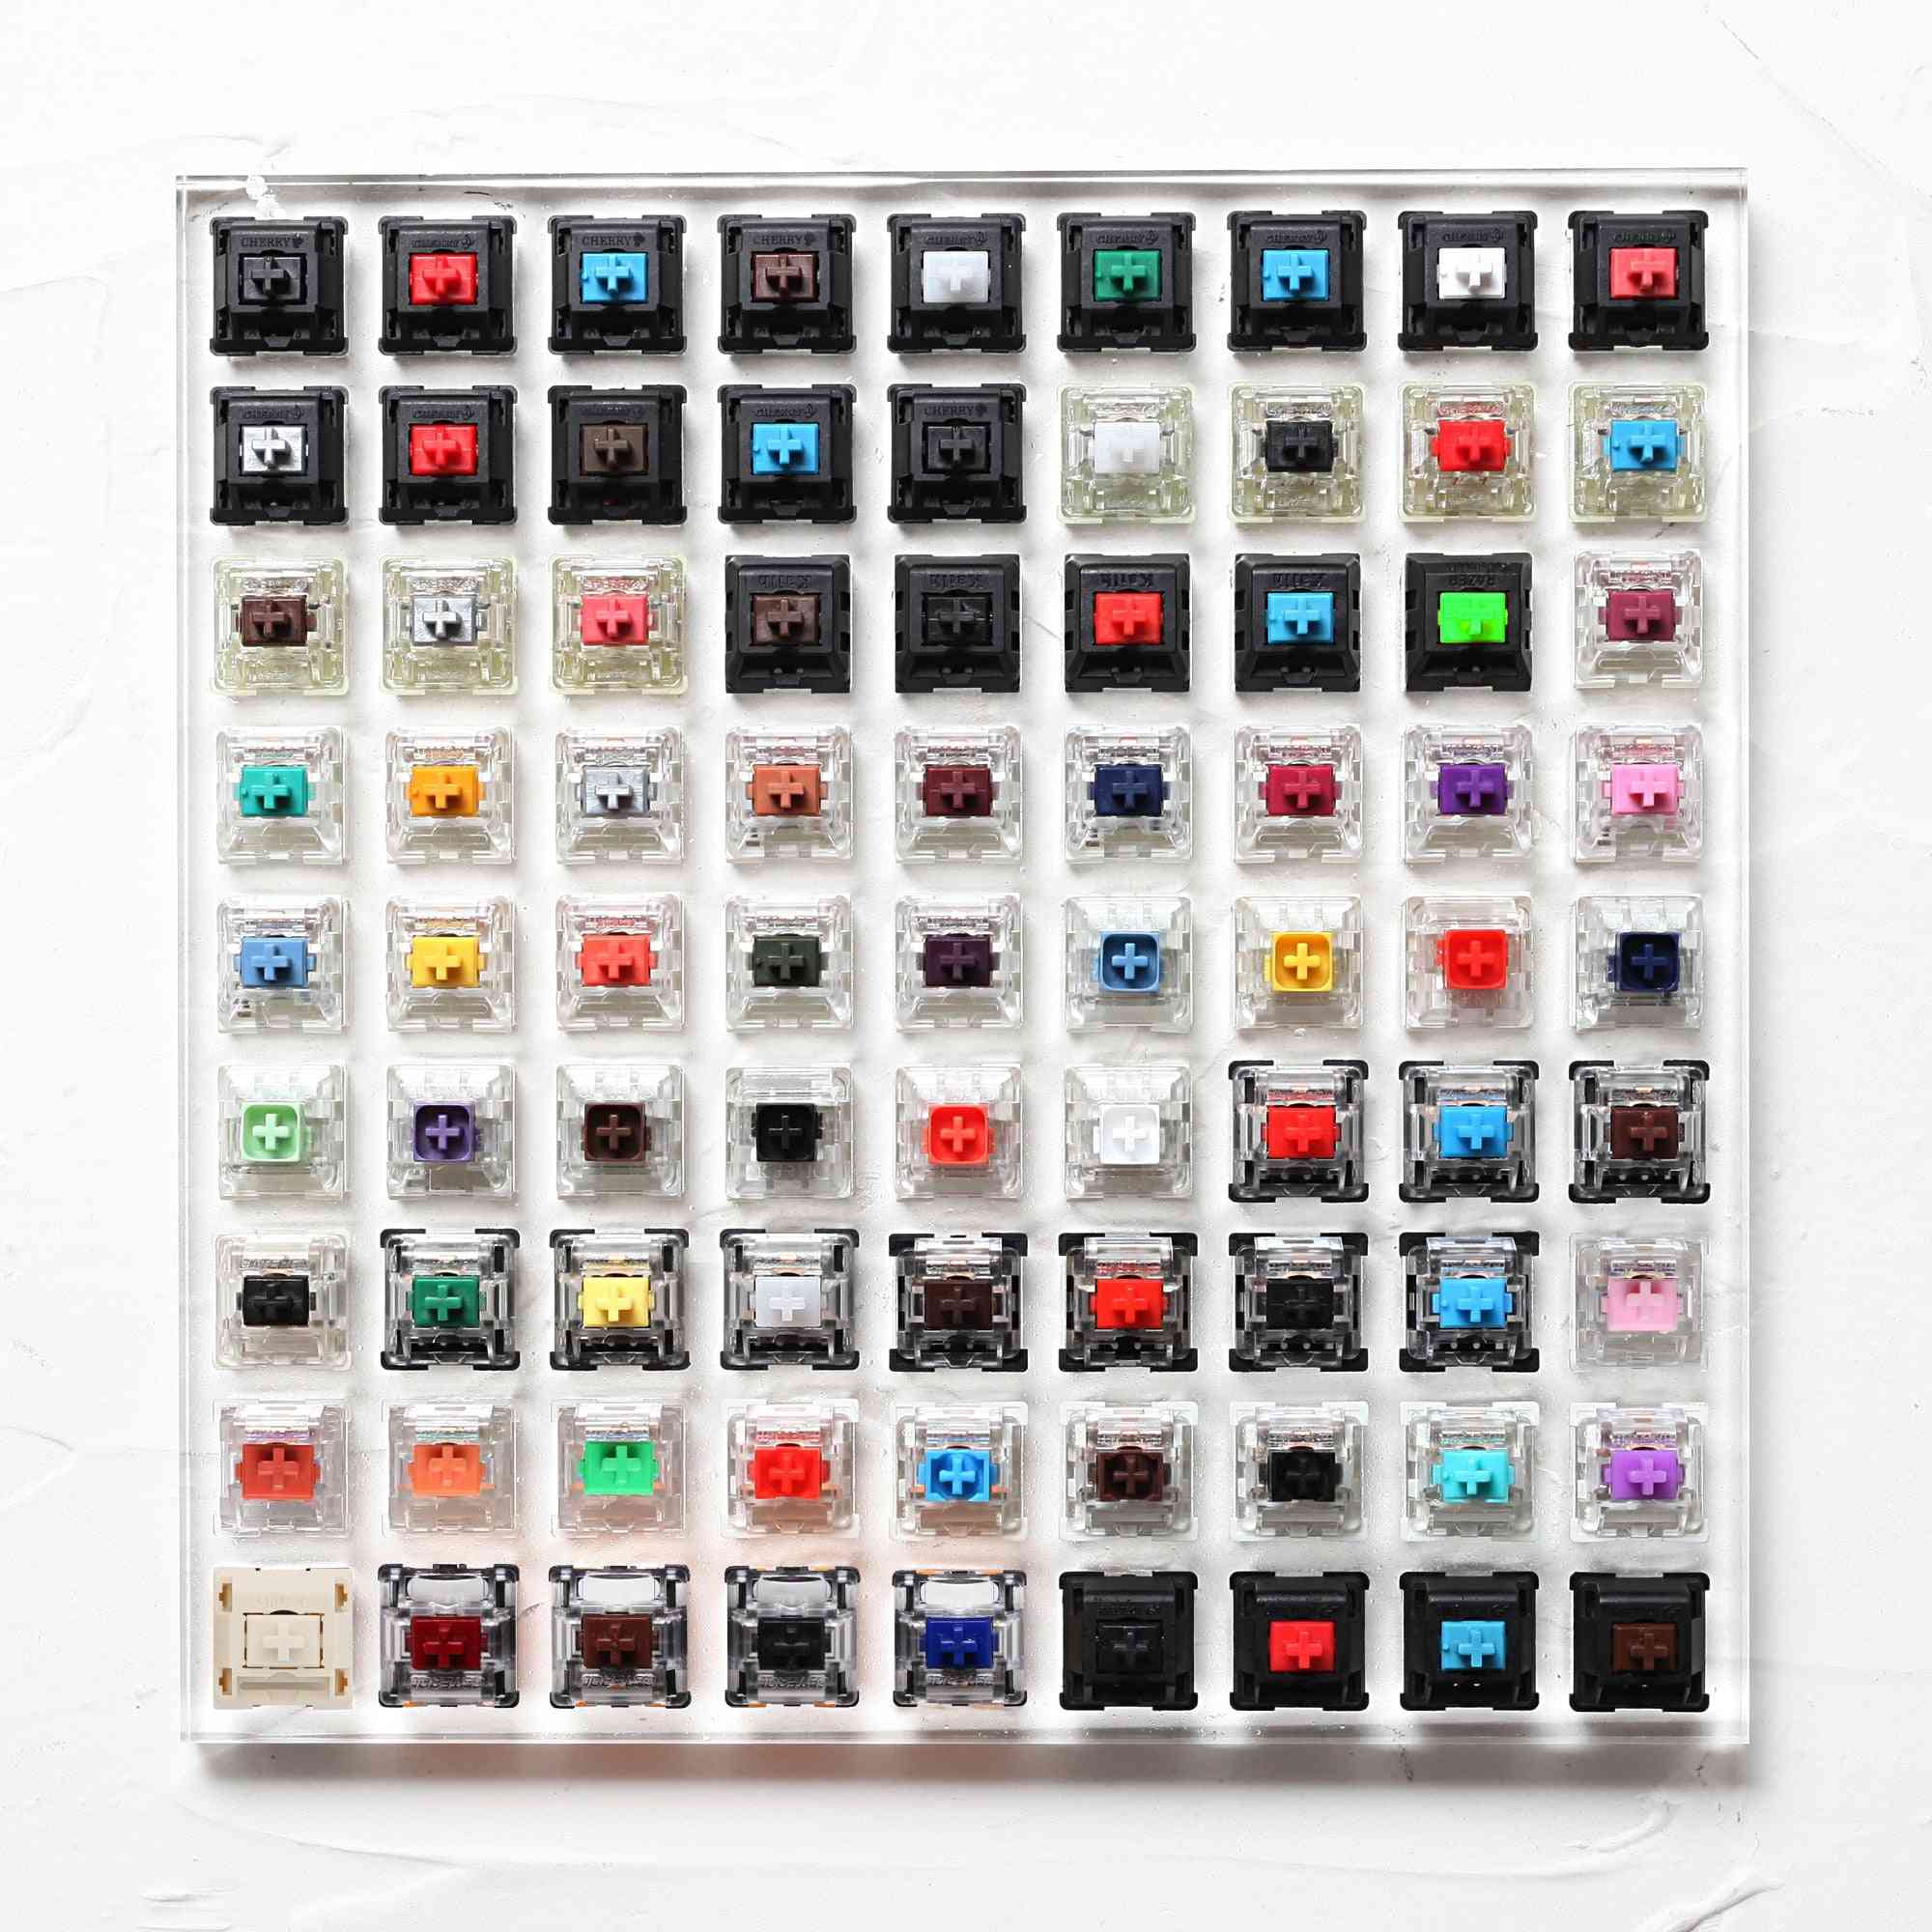 81 Switch Switches Tester With Acrylic Base Blank Keycaps For Mechanical Keyboard Cherry Kailh Gateron Outemu Ice Greetech Box